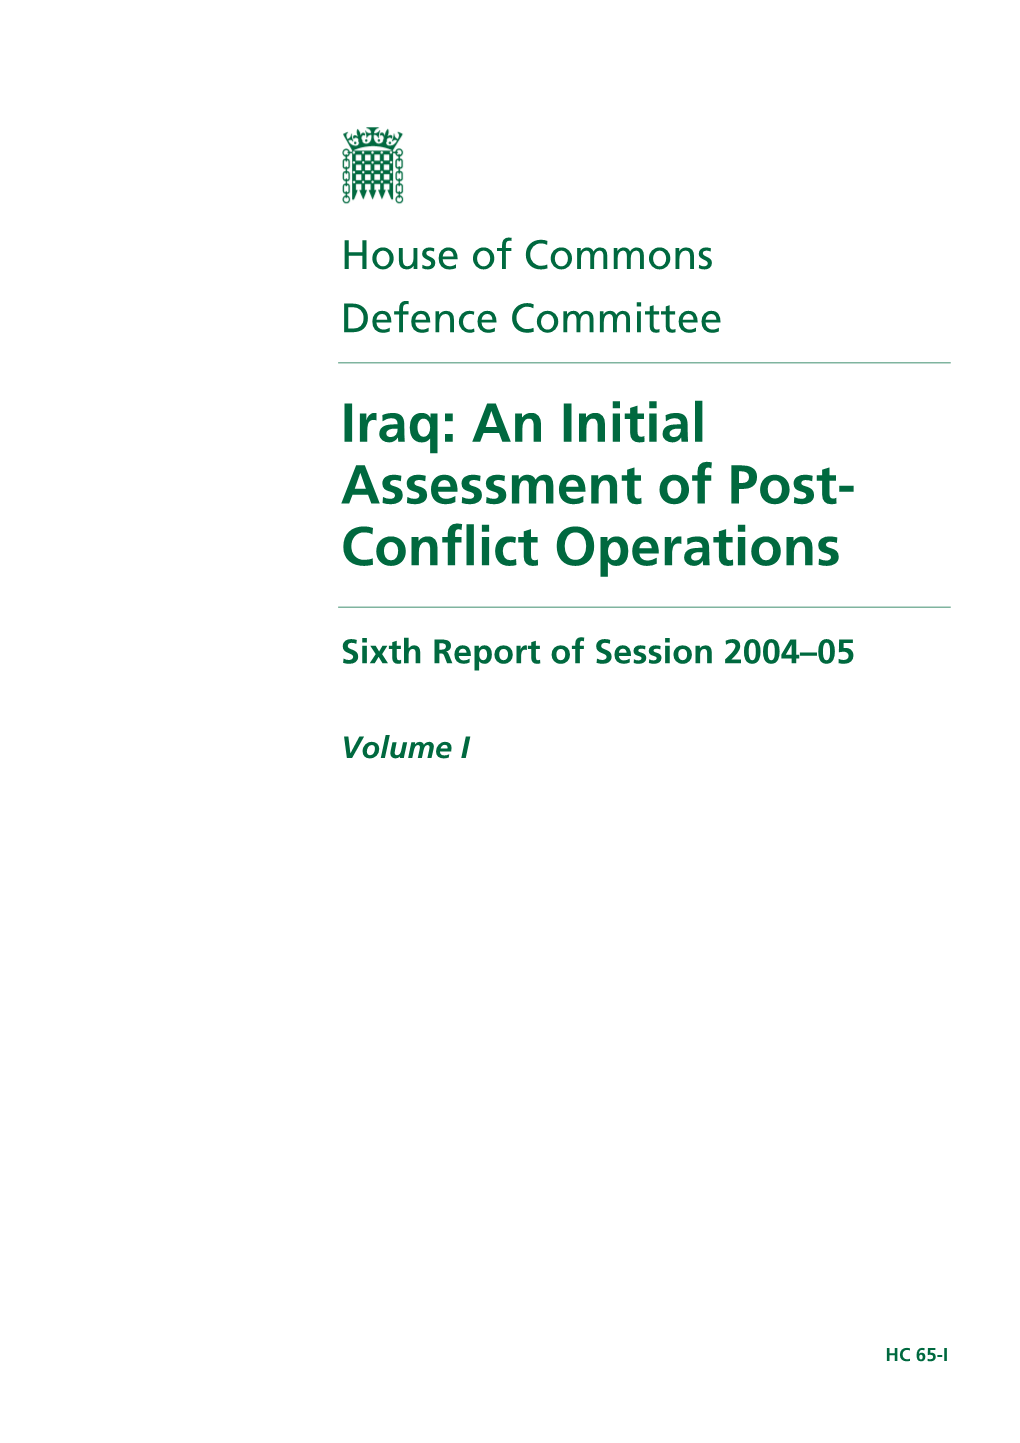 Iraq: an Initial Assessment of Post- Conflict Operations